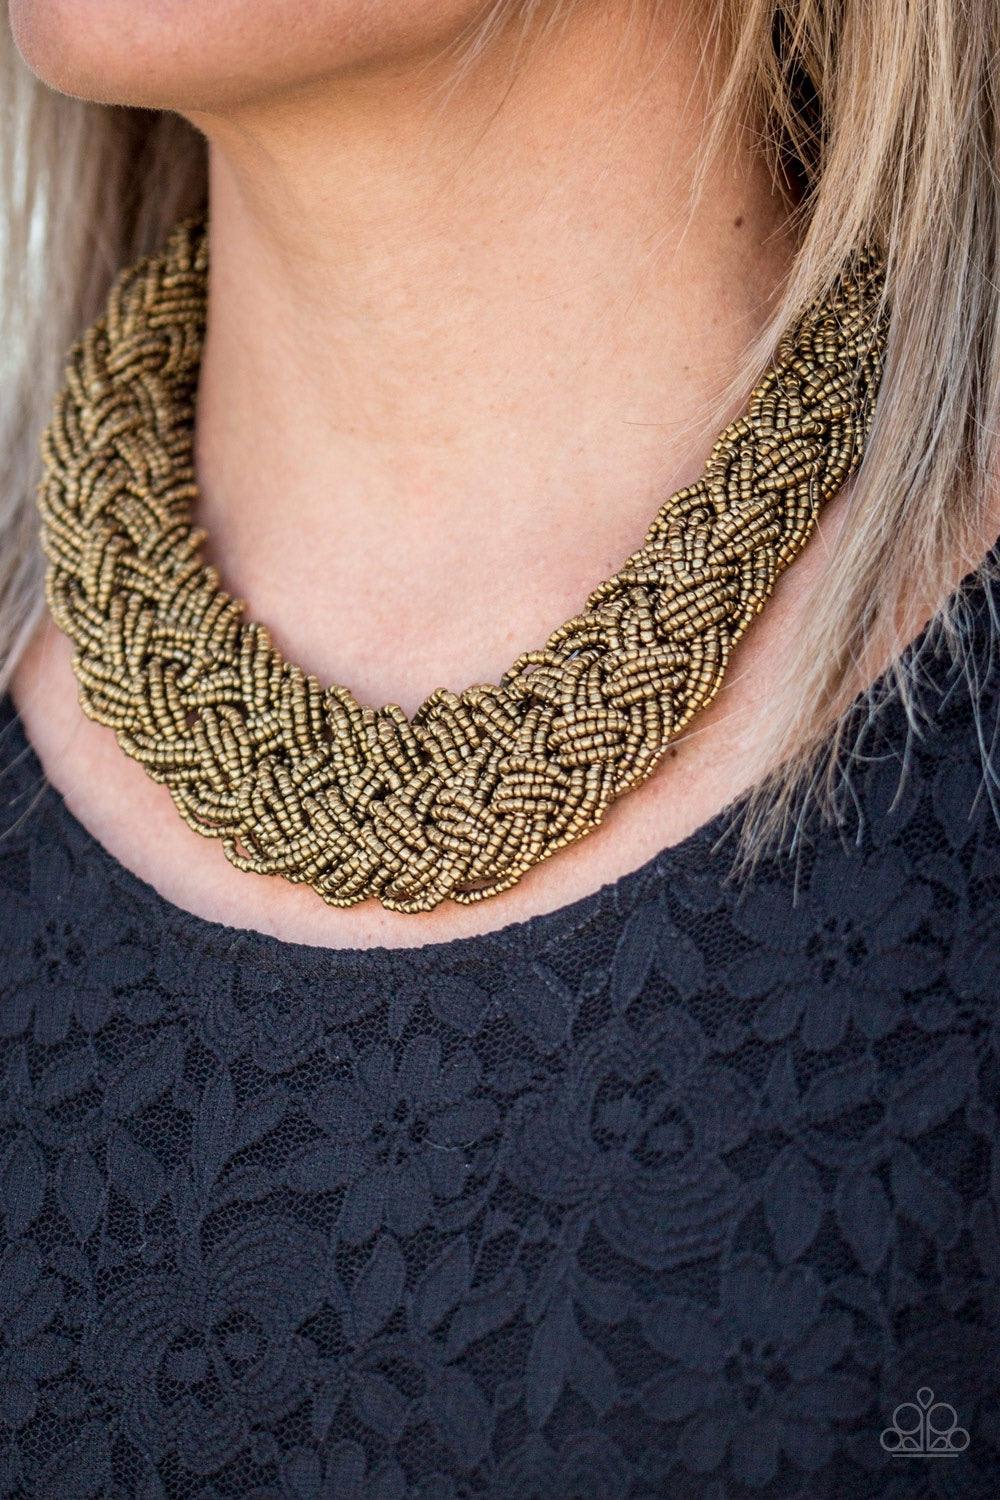 Paparazzi Accessories Mesmerizingly Mesopotamia - Brass Brushed in a metallic shimmer, brass seed beads braid into an indigenous braid below the collar for a seasonal look. Features an adjustable clasp closure. Jewelry